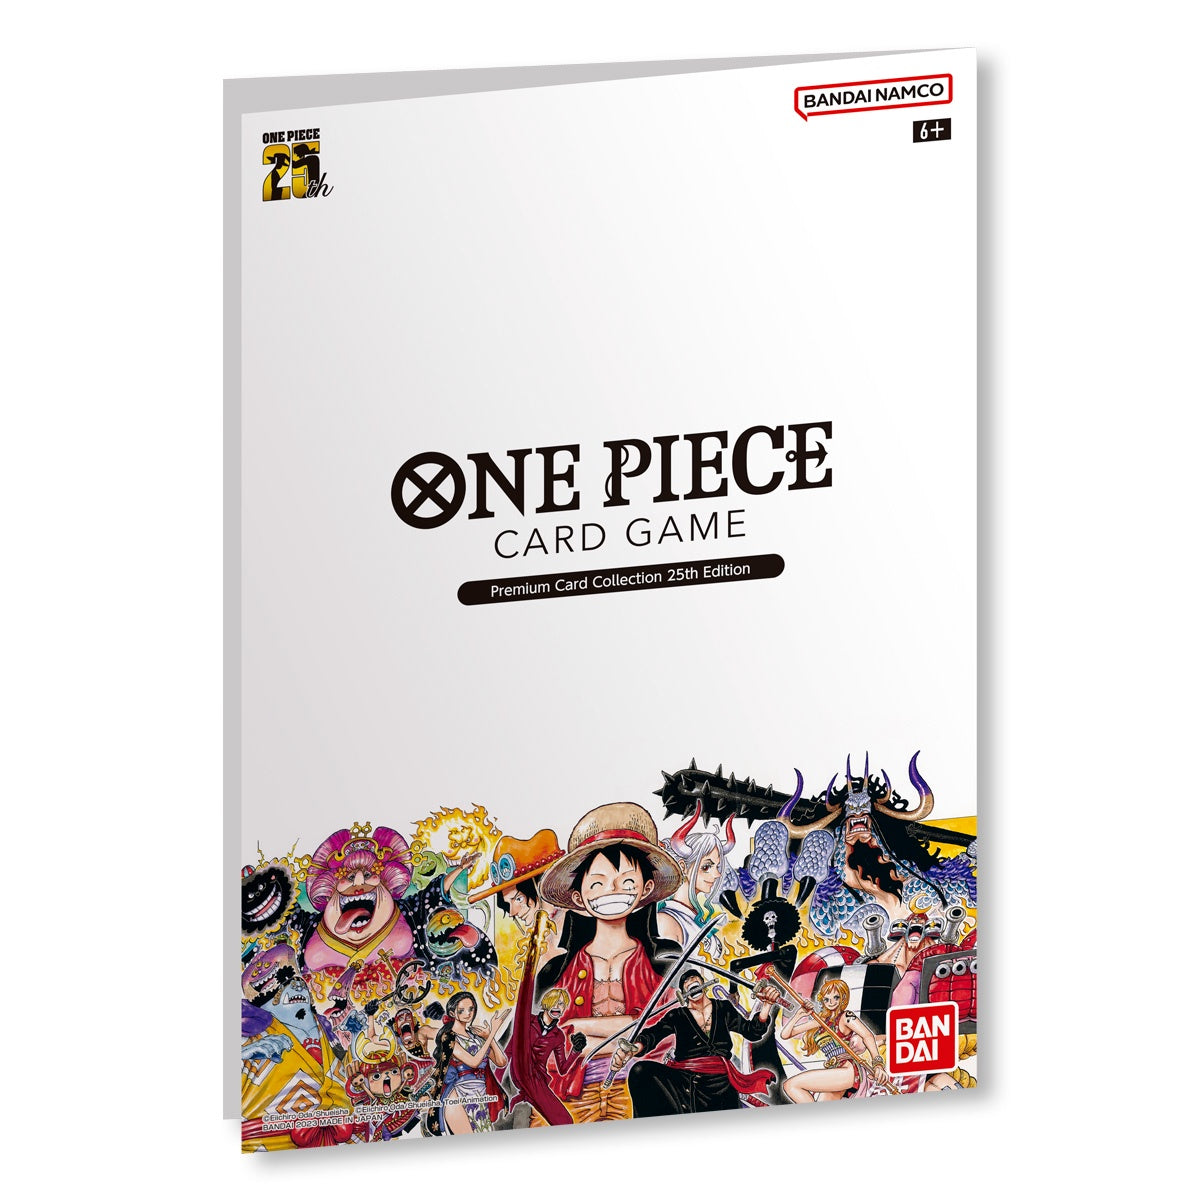 One Piece Premium Card Collection 25th Anniversary Edition